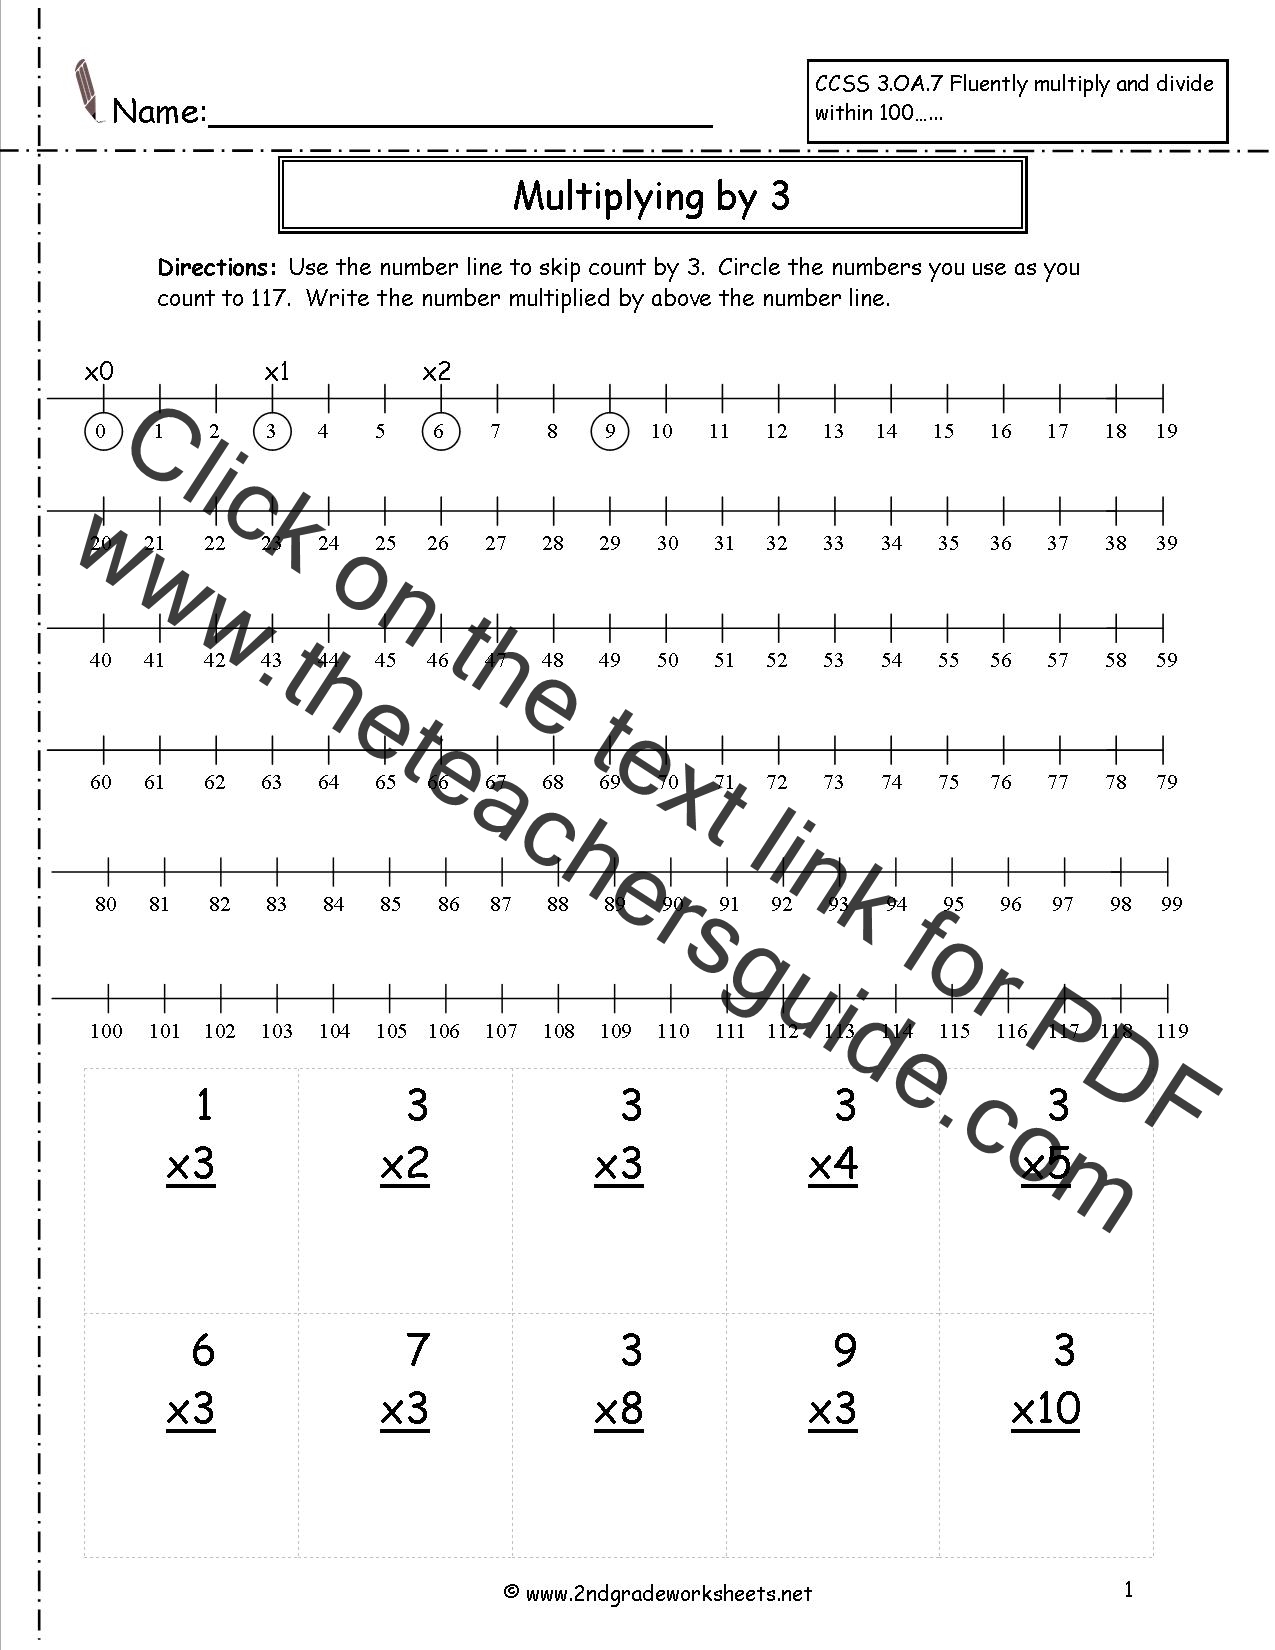 multiplication-worksheets-and-printouts